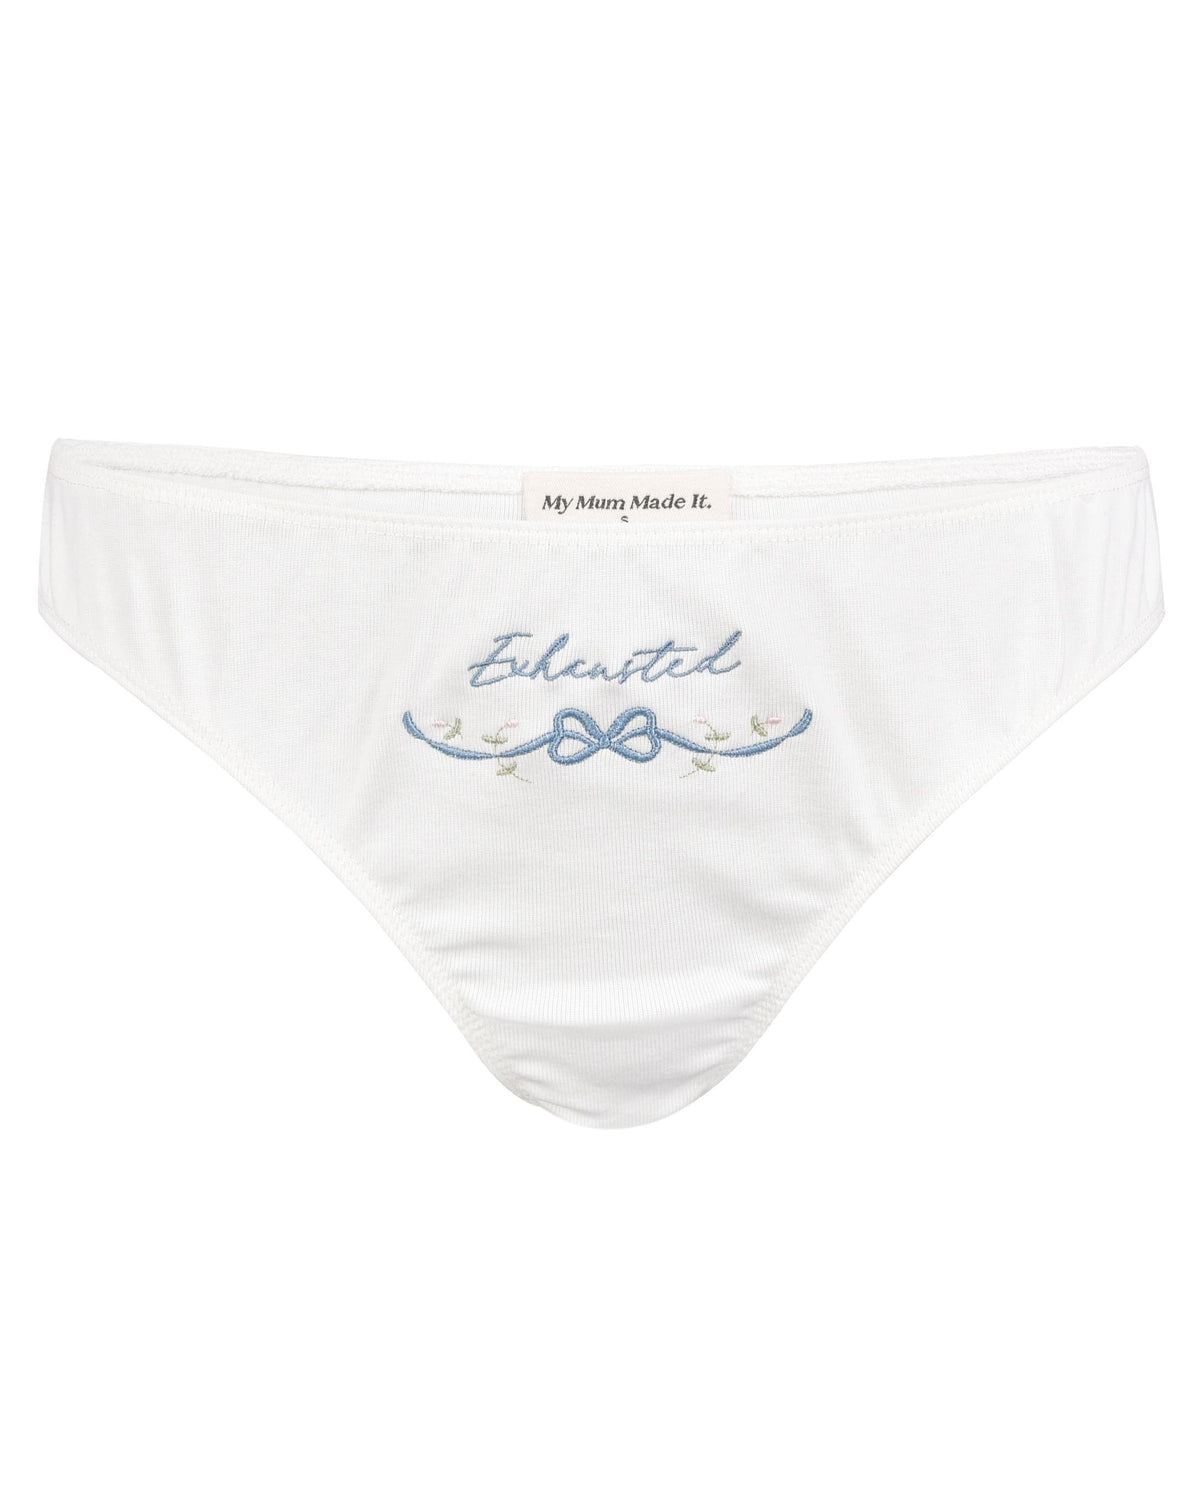 Exhausted Embroidery Briefs